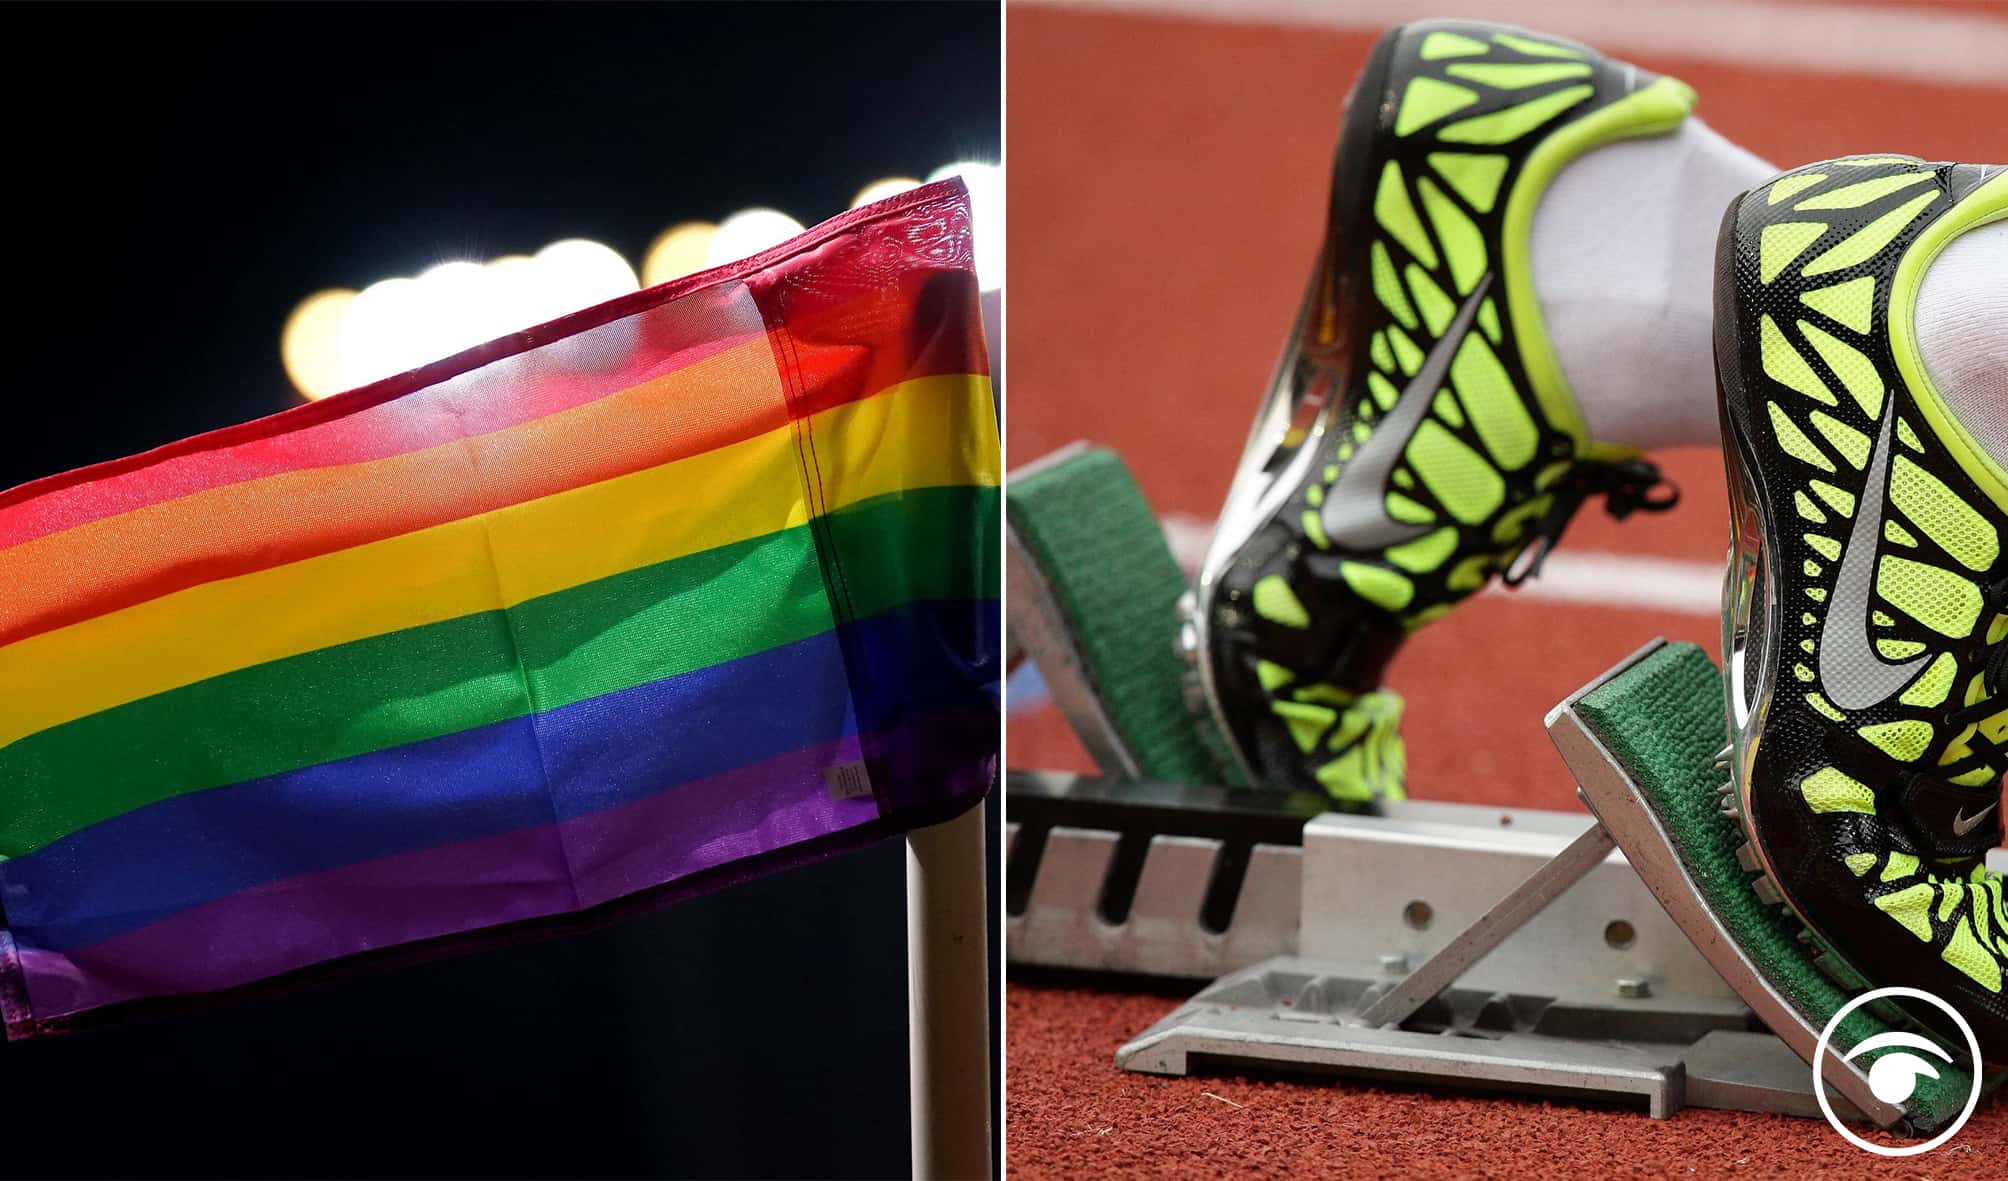 ‘Dangerous project with deadly consequences’ as US state bans transgender athletes from women’s teams